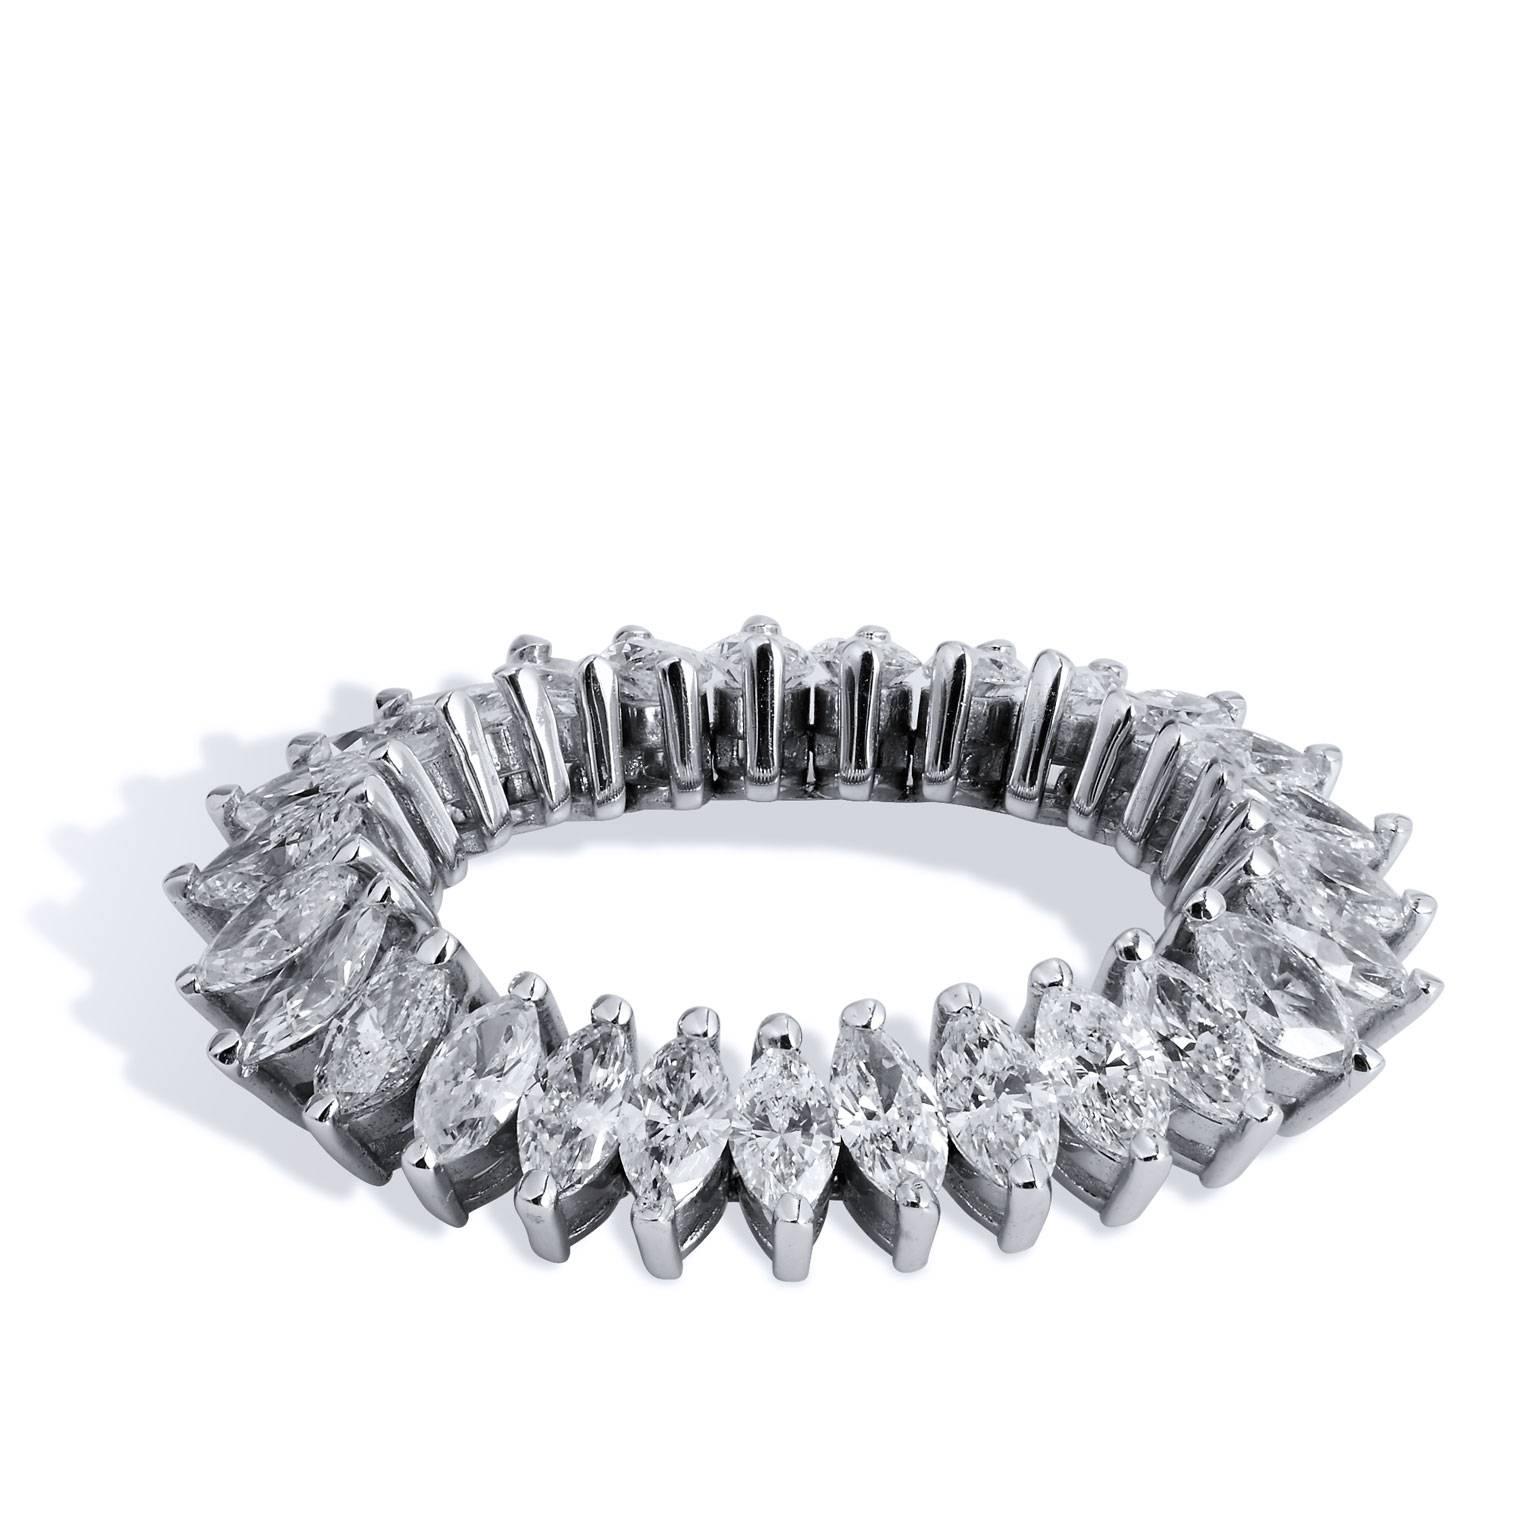 Enjoy this previously loved 14 karat white gold eternity band featuring a total weight of 2.25 carat of marquis cut diamond (H/I/SI2).